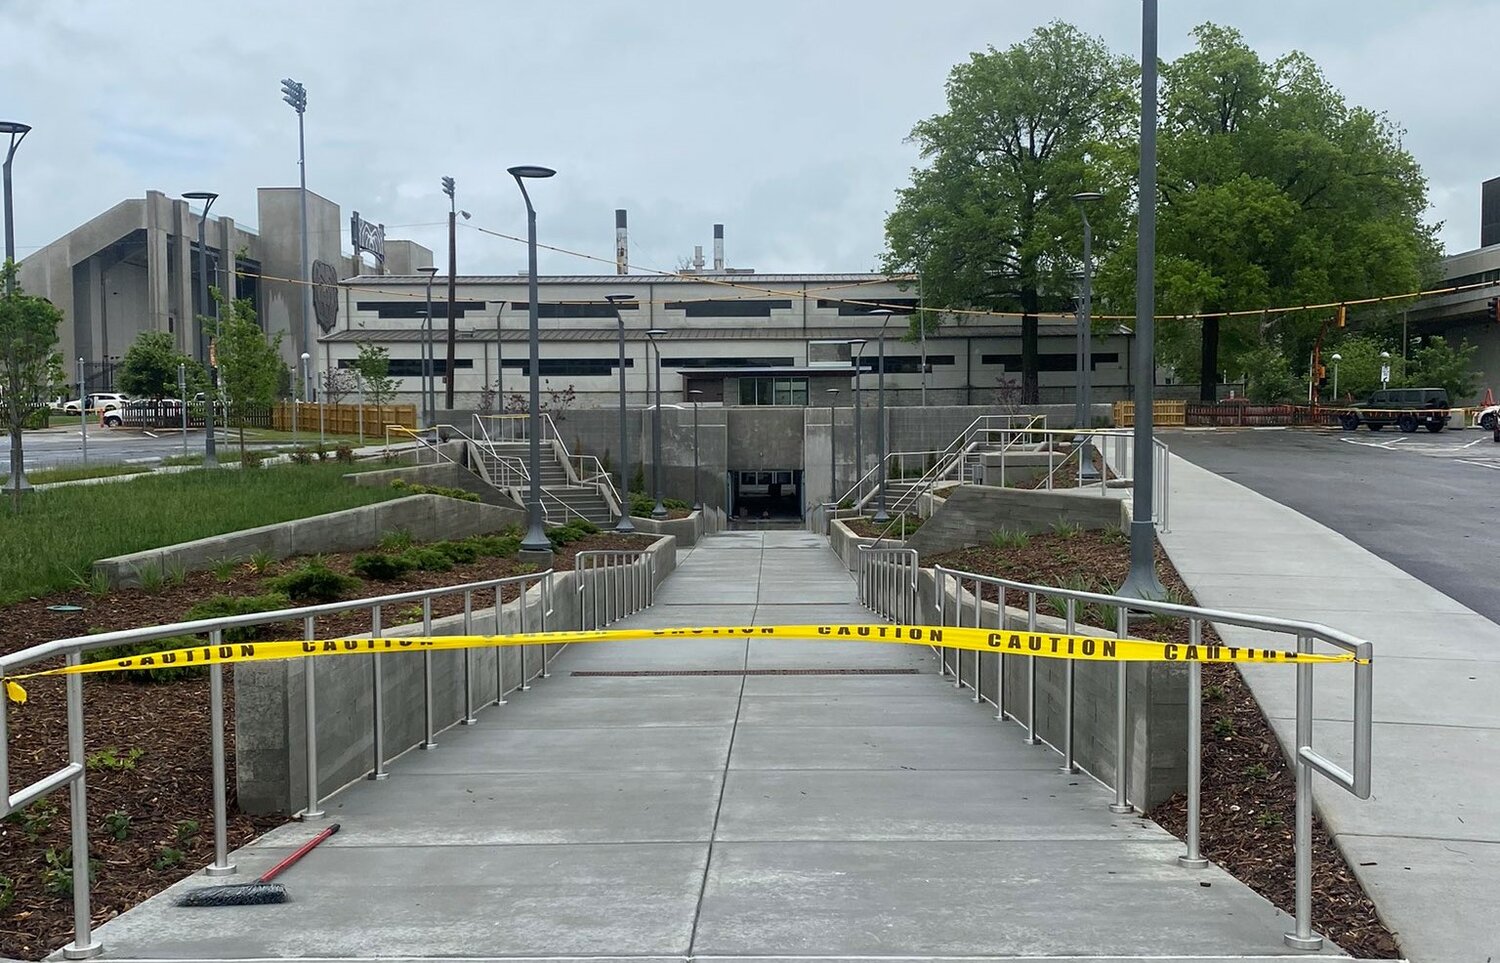 The underpass connecting MSU’s campus to university parking lots reopened May 12.